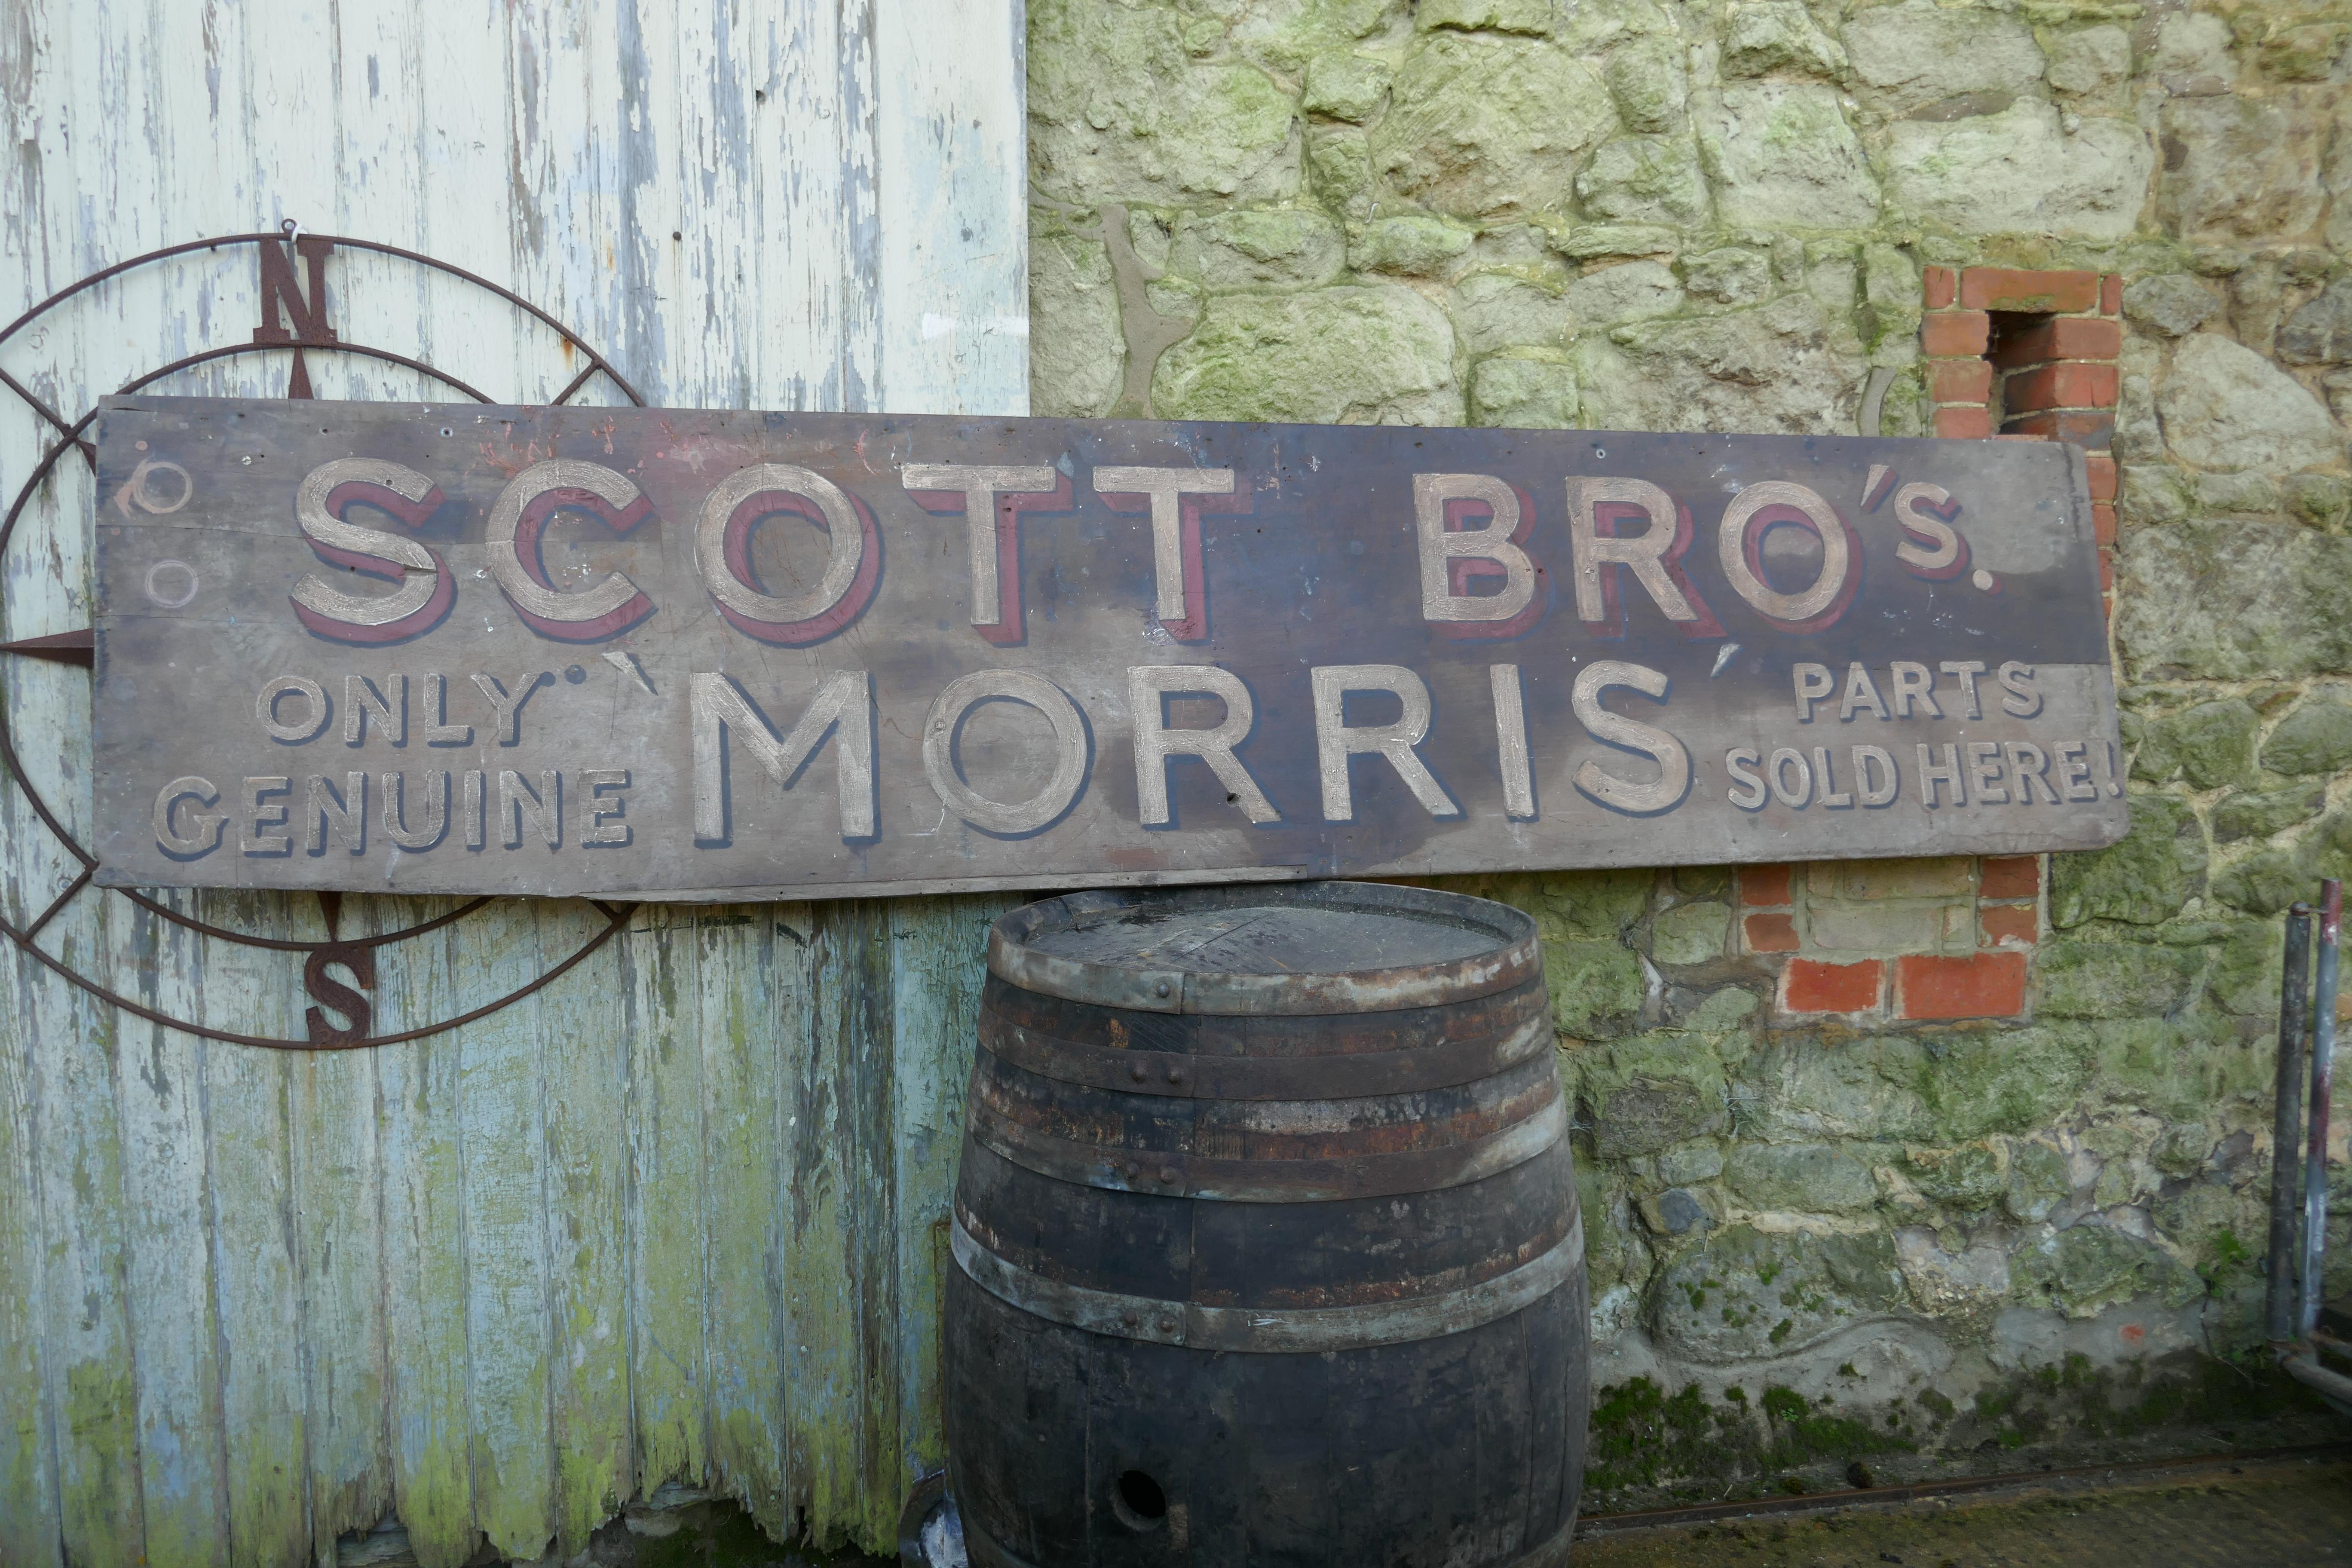 Large painted wooden automobile advertising sign, “Scott Bro’s Morris”

This is a large painted wooden wall sign 
Shabby now but quite readable
It is 25” high and 108” wide 
TGB421.